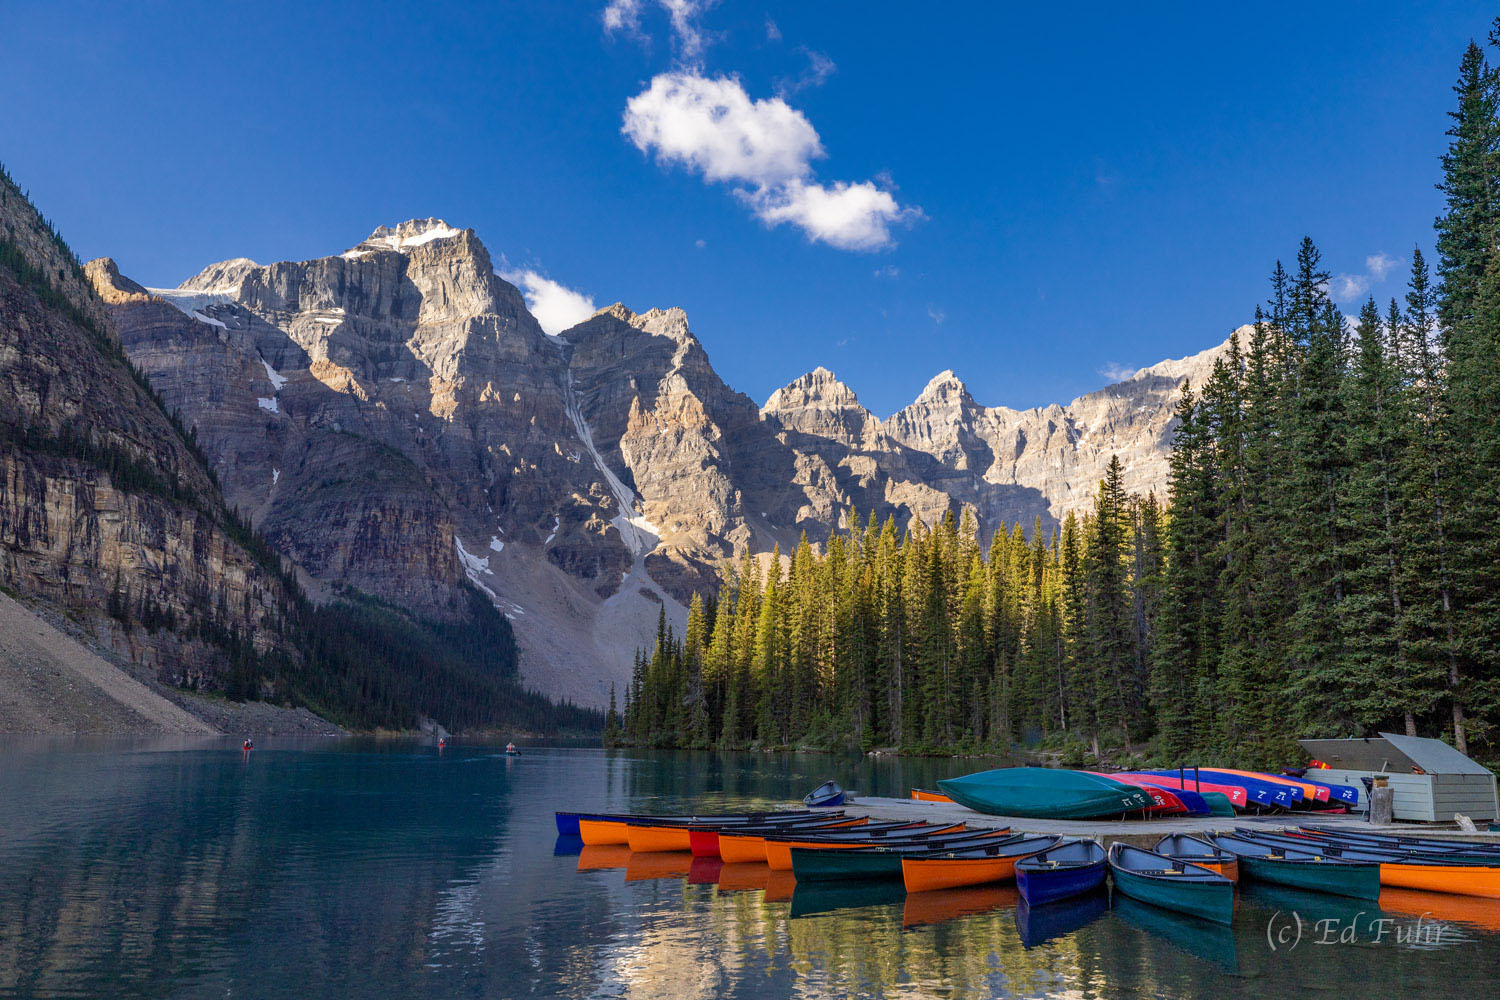 The warm light of late afternoon highlights the colorful canoes that are now tied up for the day on beautiful Lake Moraine.